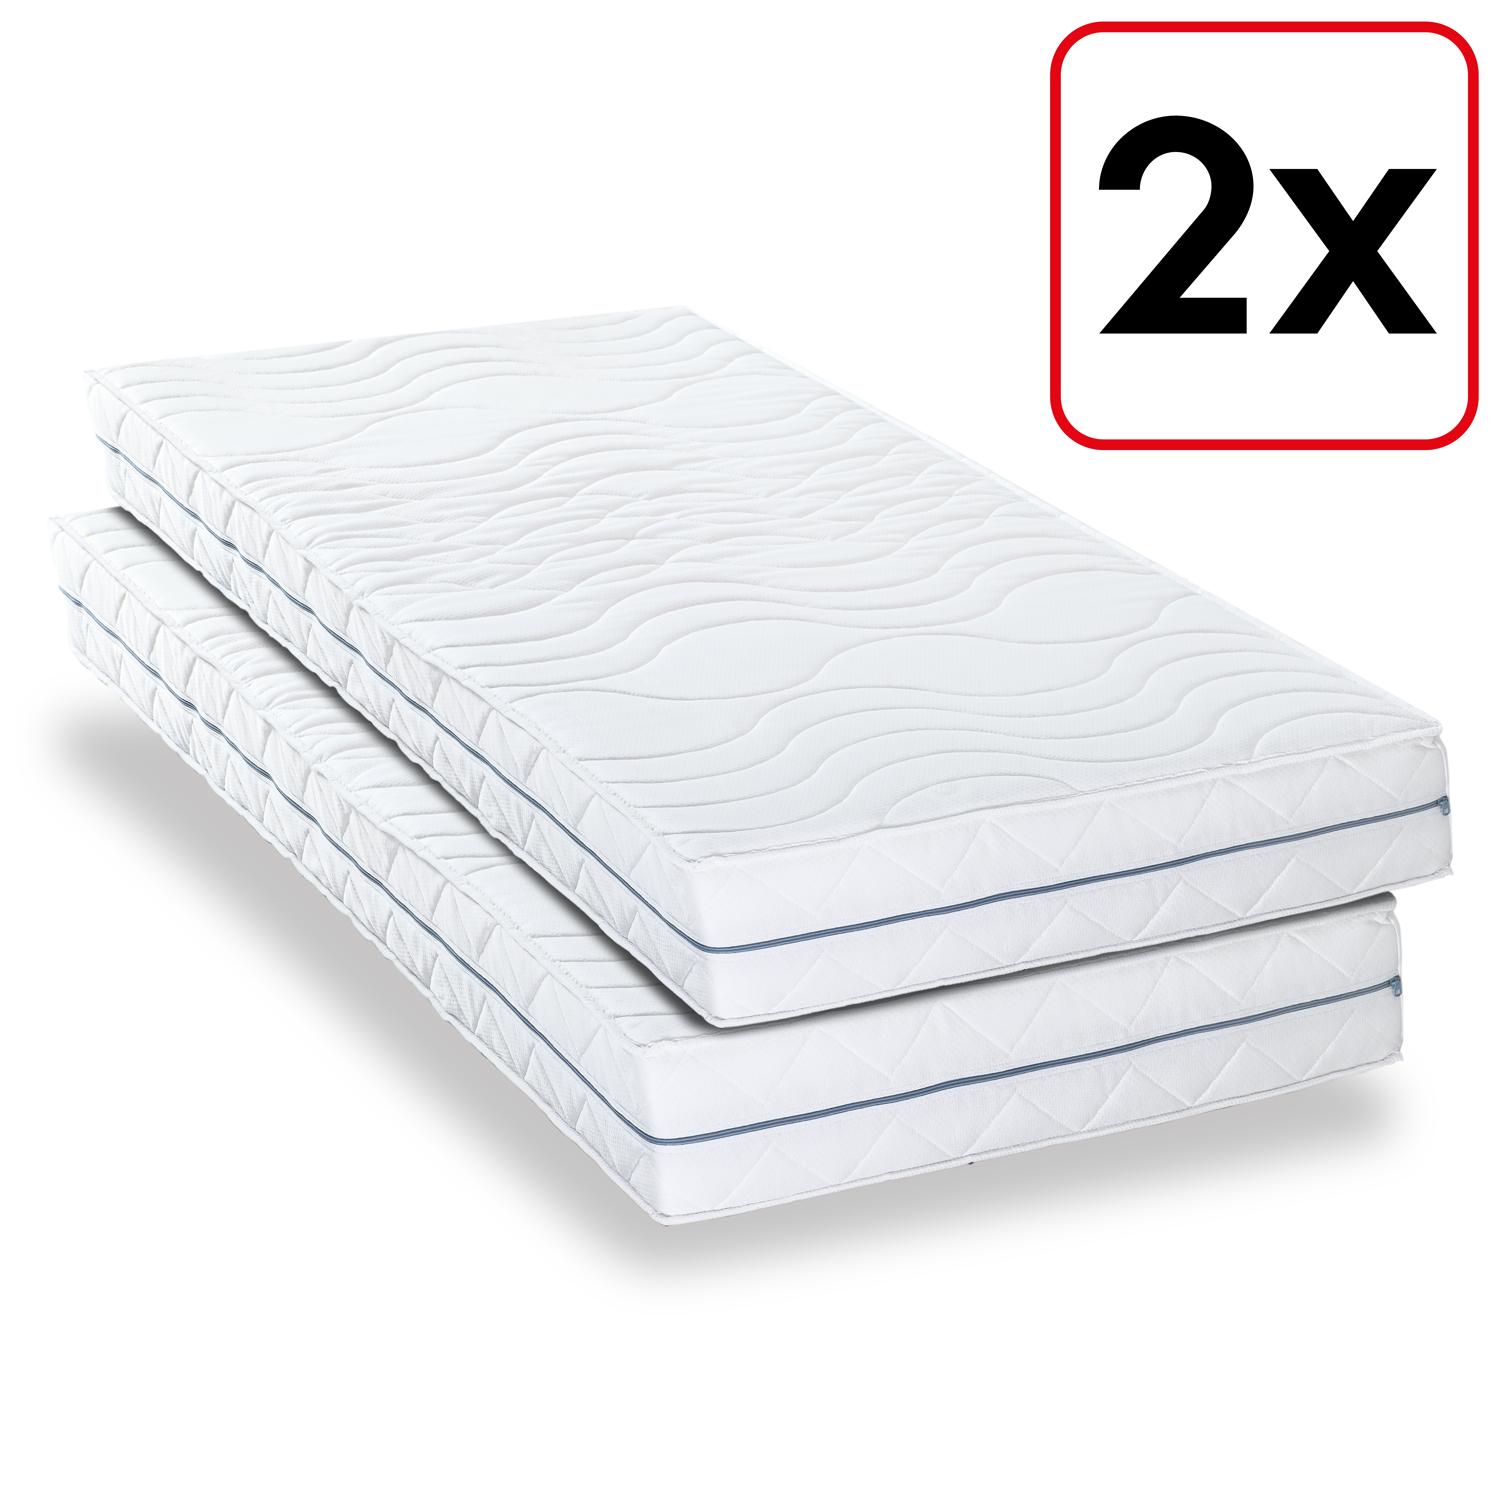 Double pack orthopaedic mattress 80x200 cm 7-zone Supportho Premium, height 18 cm, firmness level H2/H3 Twin